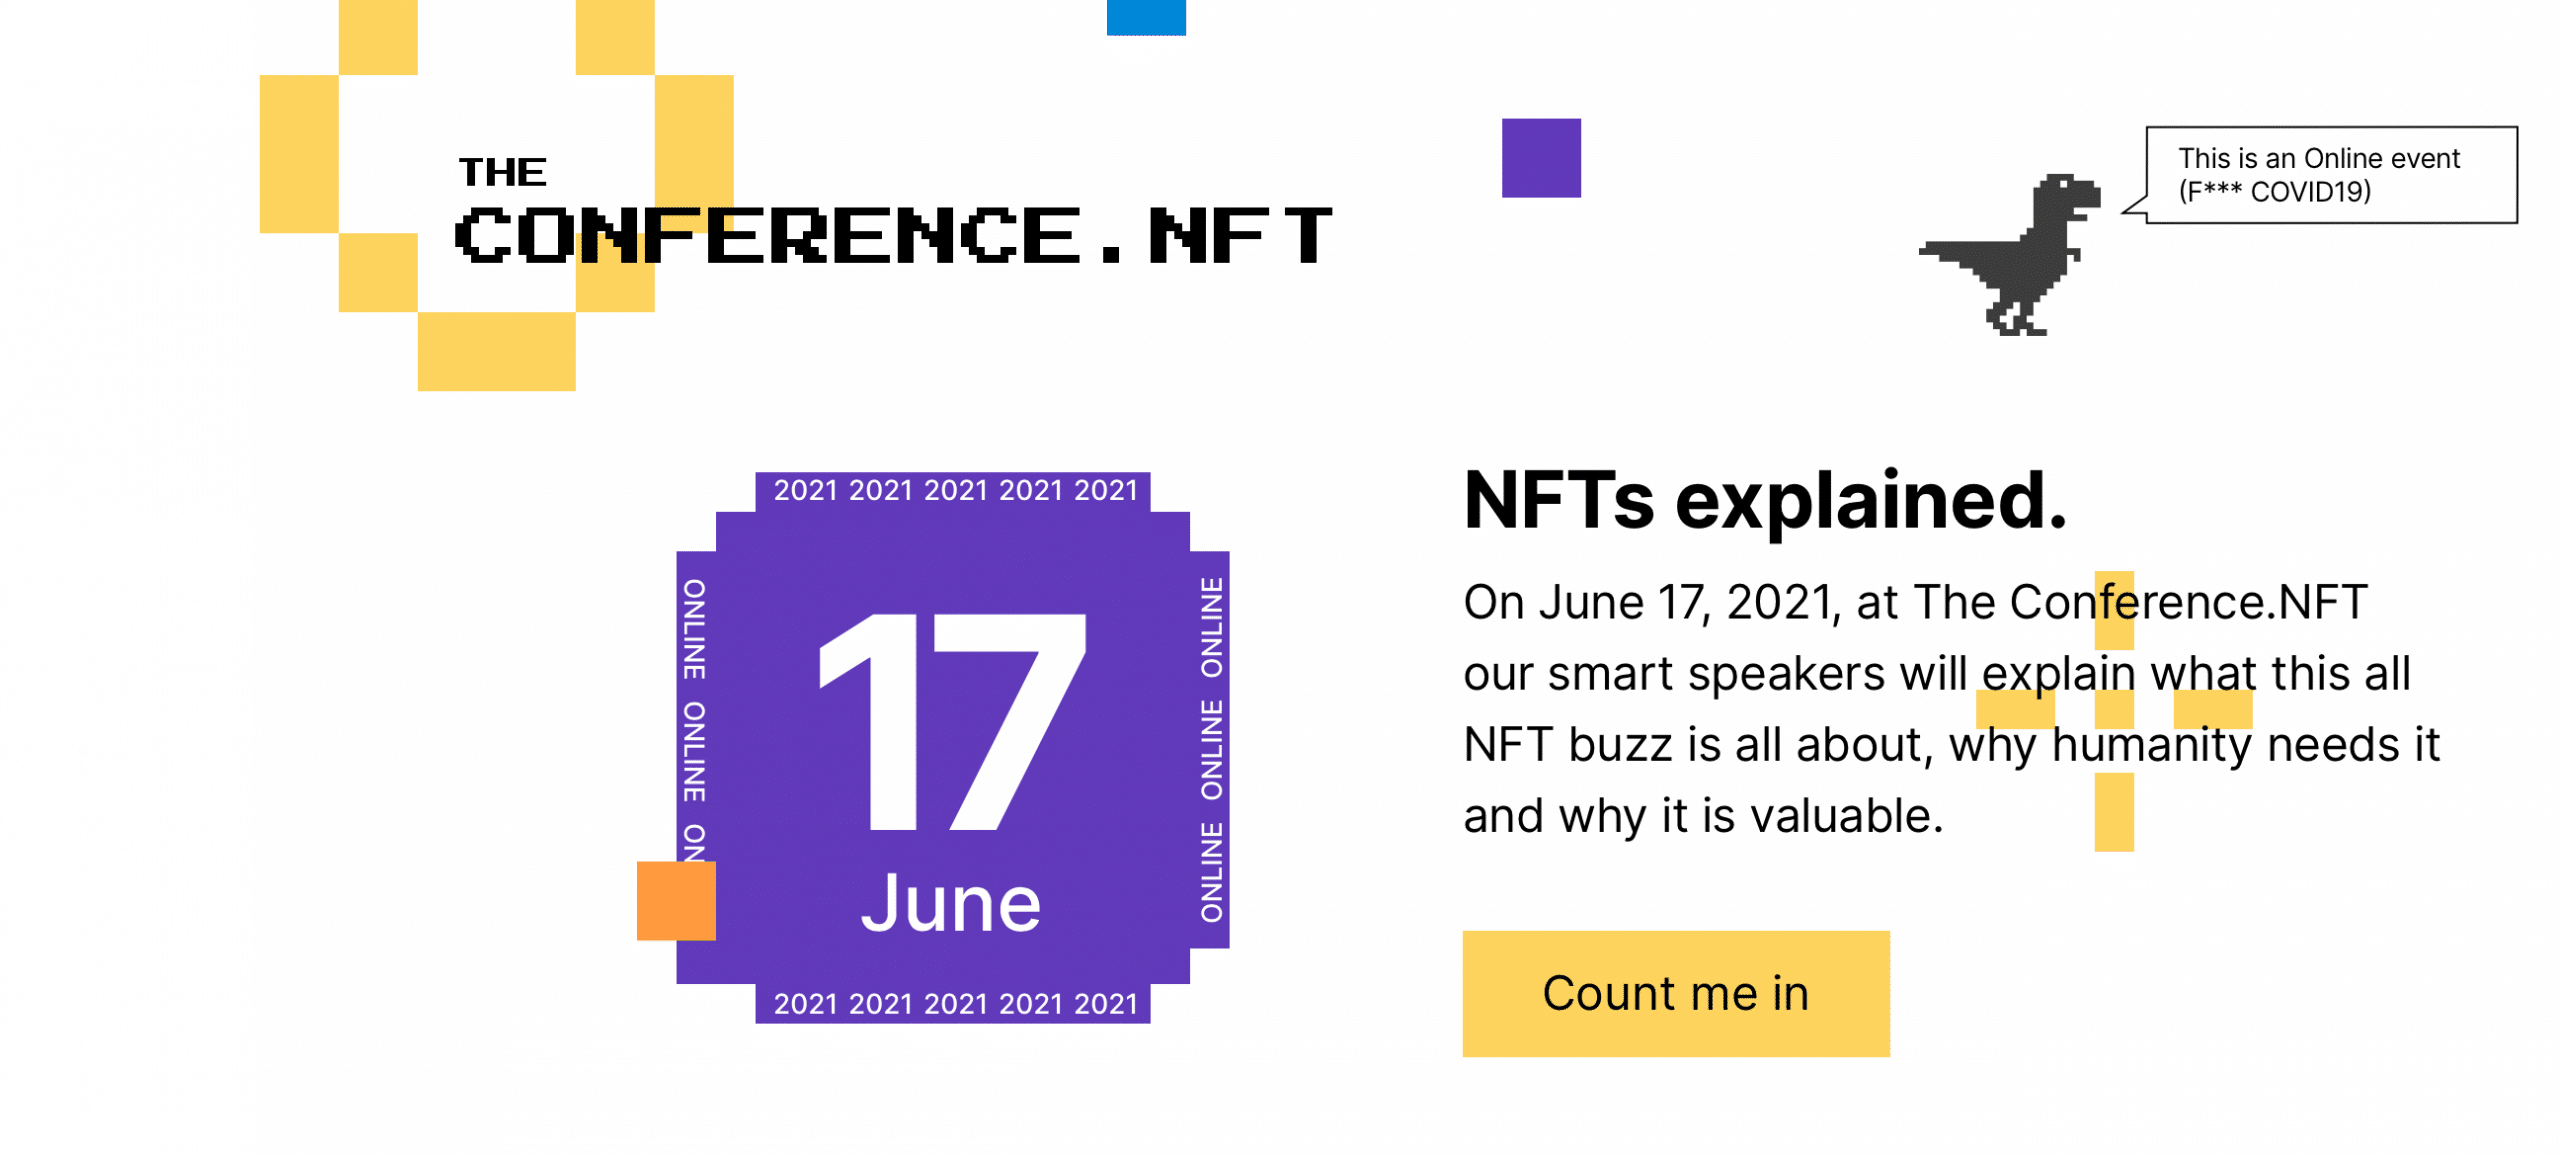 The Conference.NFT's website is simpler, but with dinosaurs